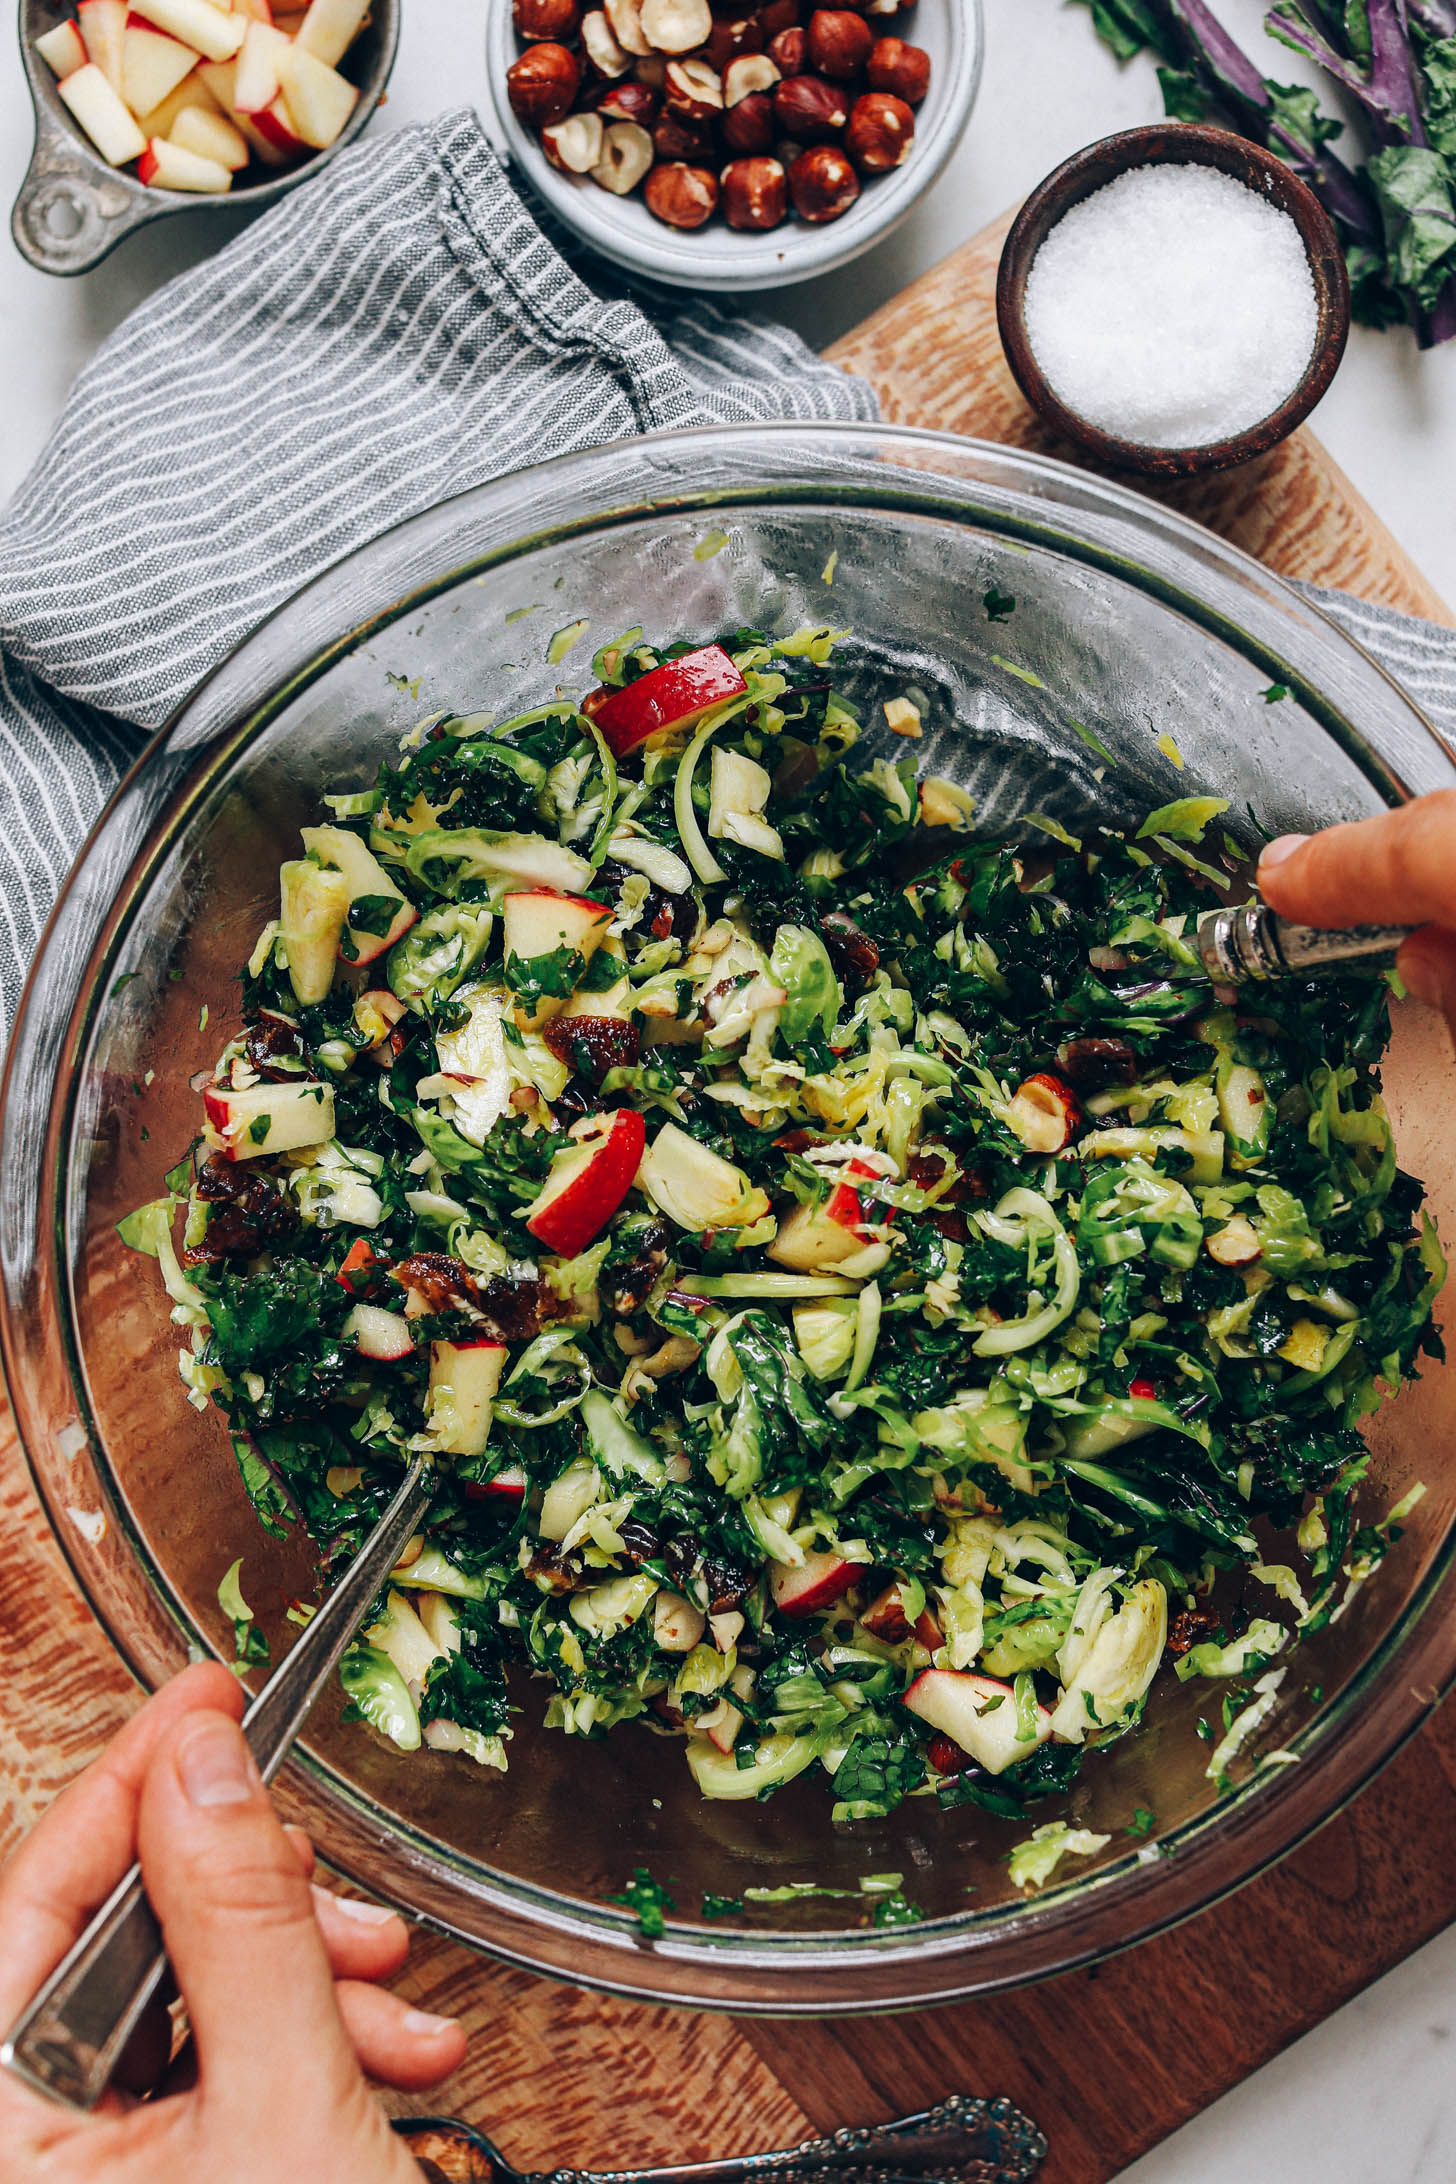 Tossing Brussel sprout salad with vinaigrette dressing